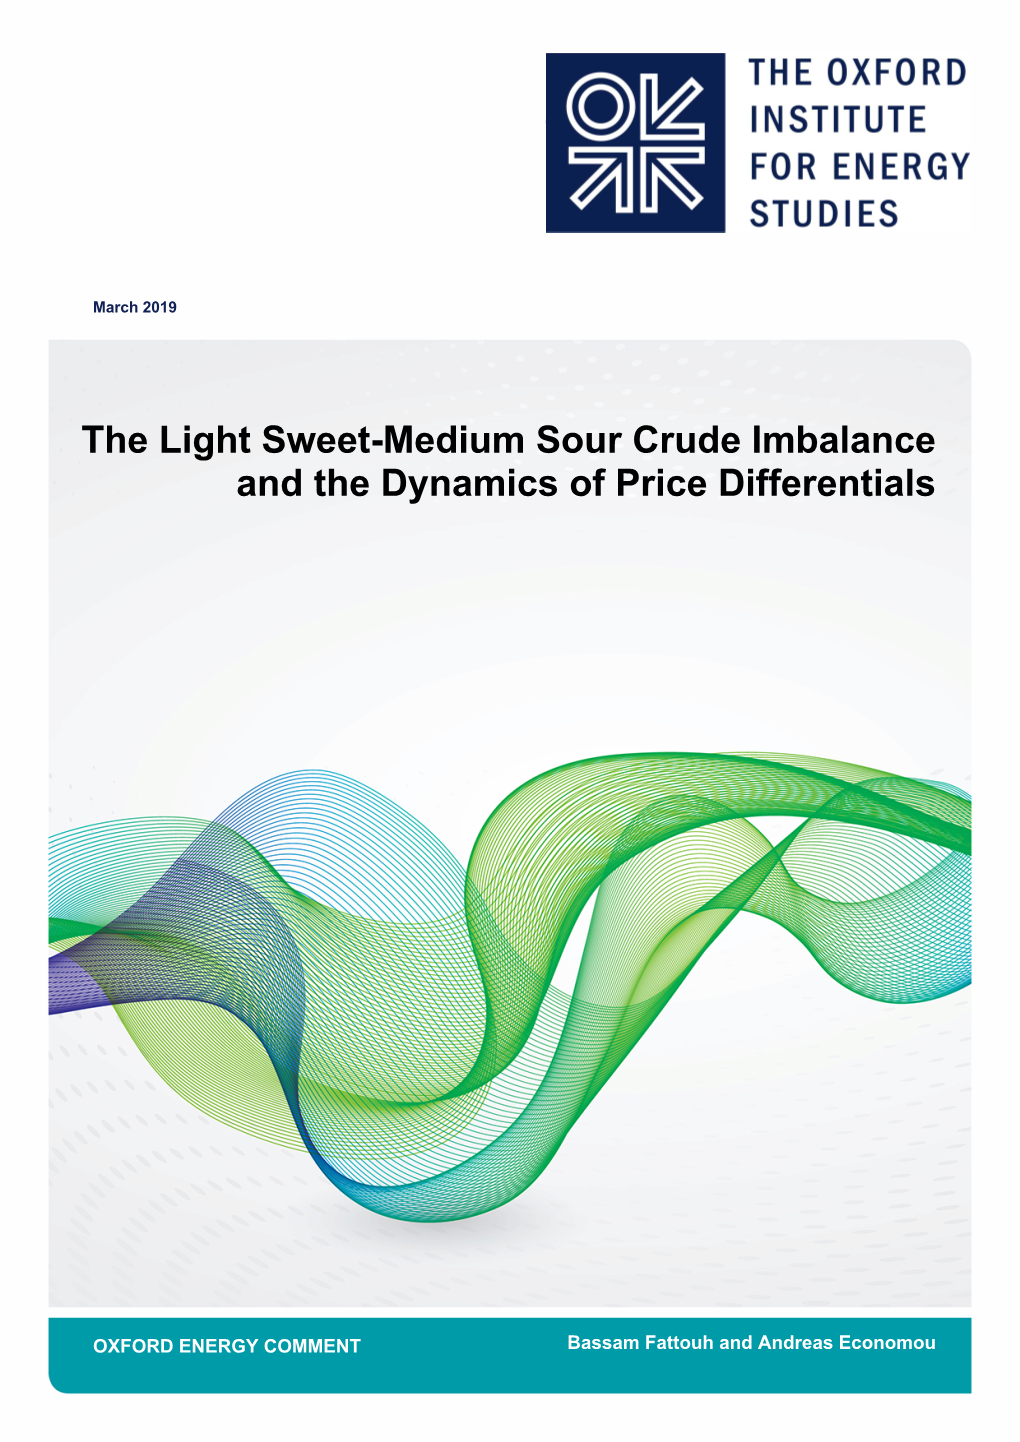 The Light Sweet-Medium Sour Crude Imbalance and the Dynamics of Price Differentials